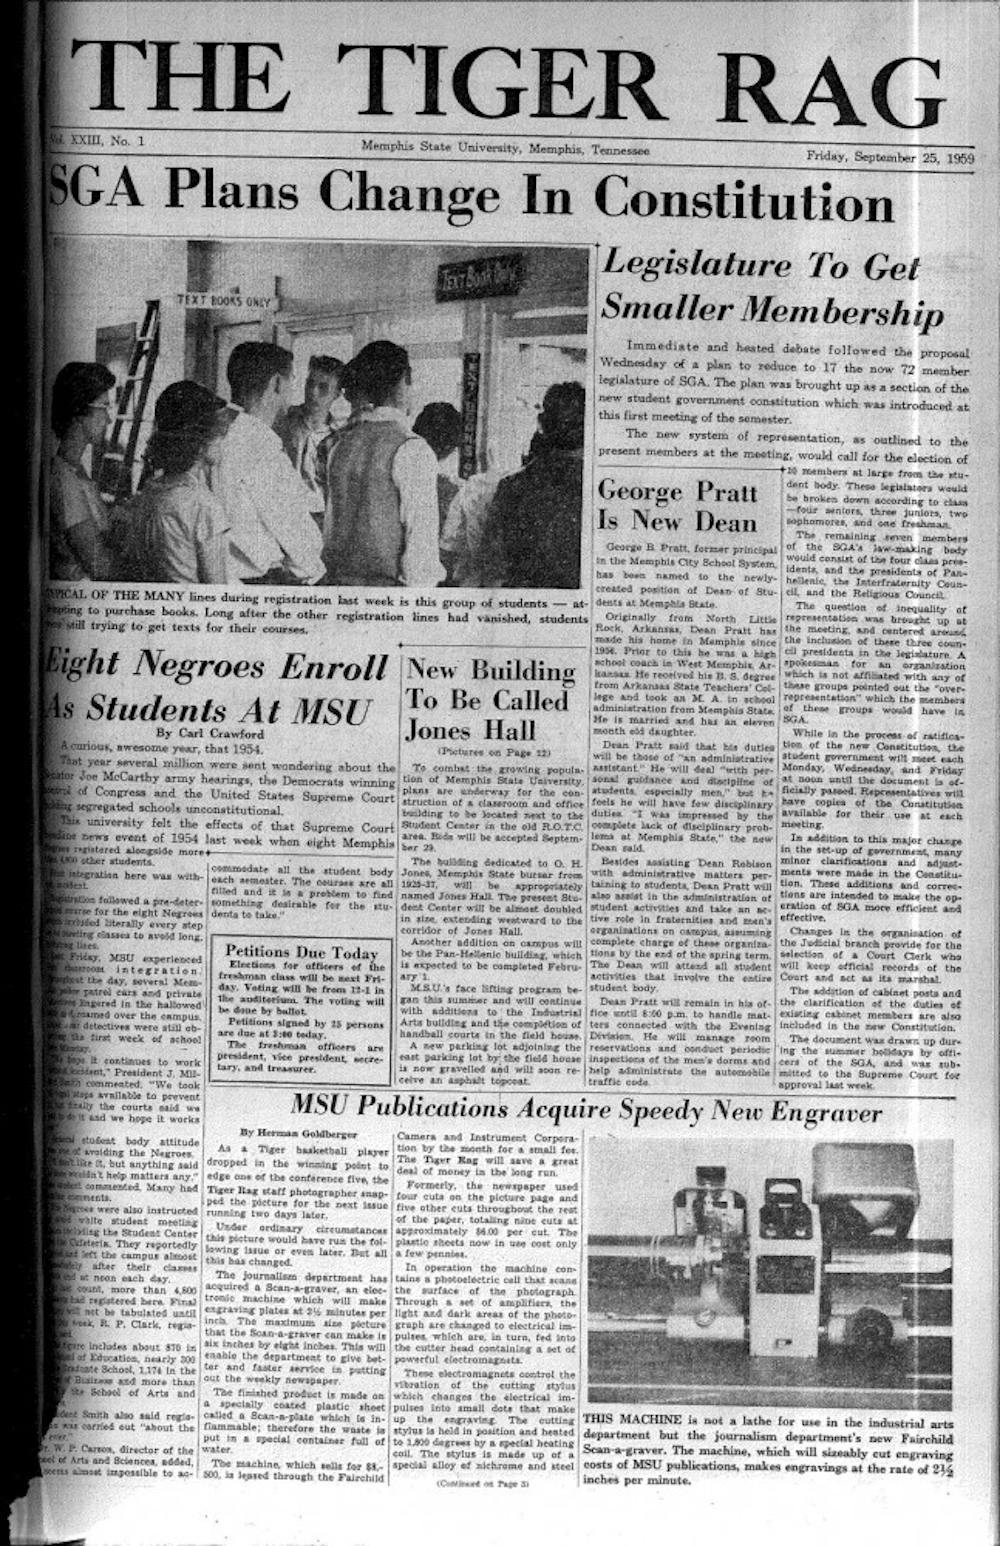 <p>The predecessor of <em>The Daily Helmsman</em>, <em>The Tiger Rag</em>, covered the integration of the University of Memphis with just a brief story at the bottom left corner of the front page. Eight students enrolled at the university in the fall of 1959 and became the first black students at the university.</p>